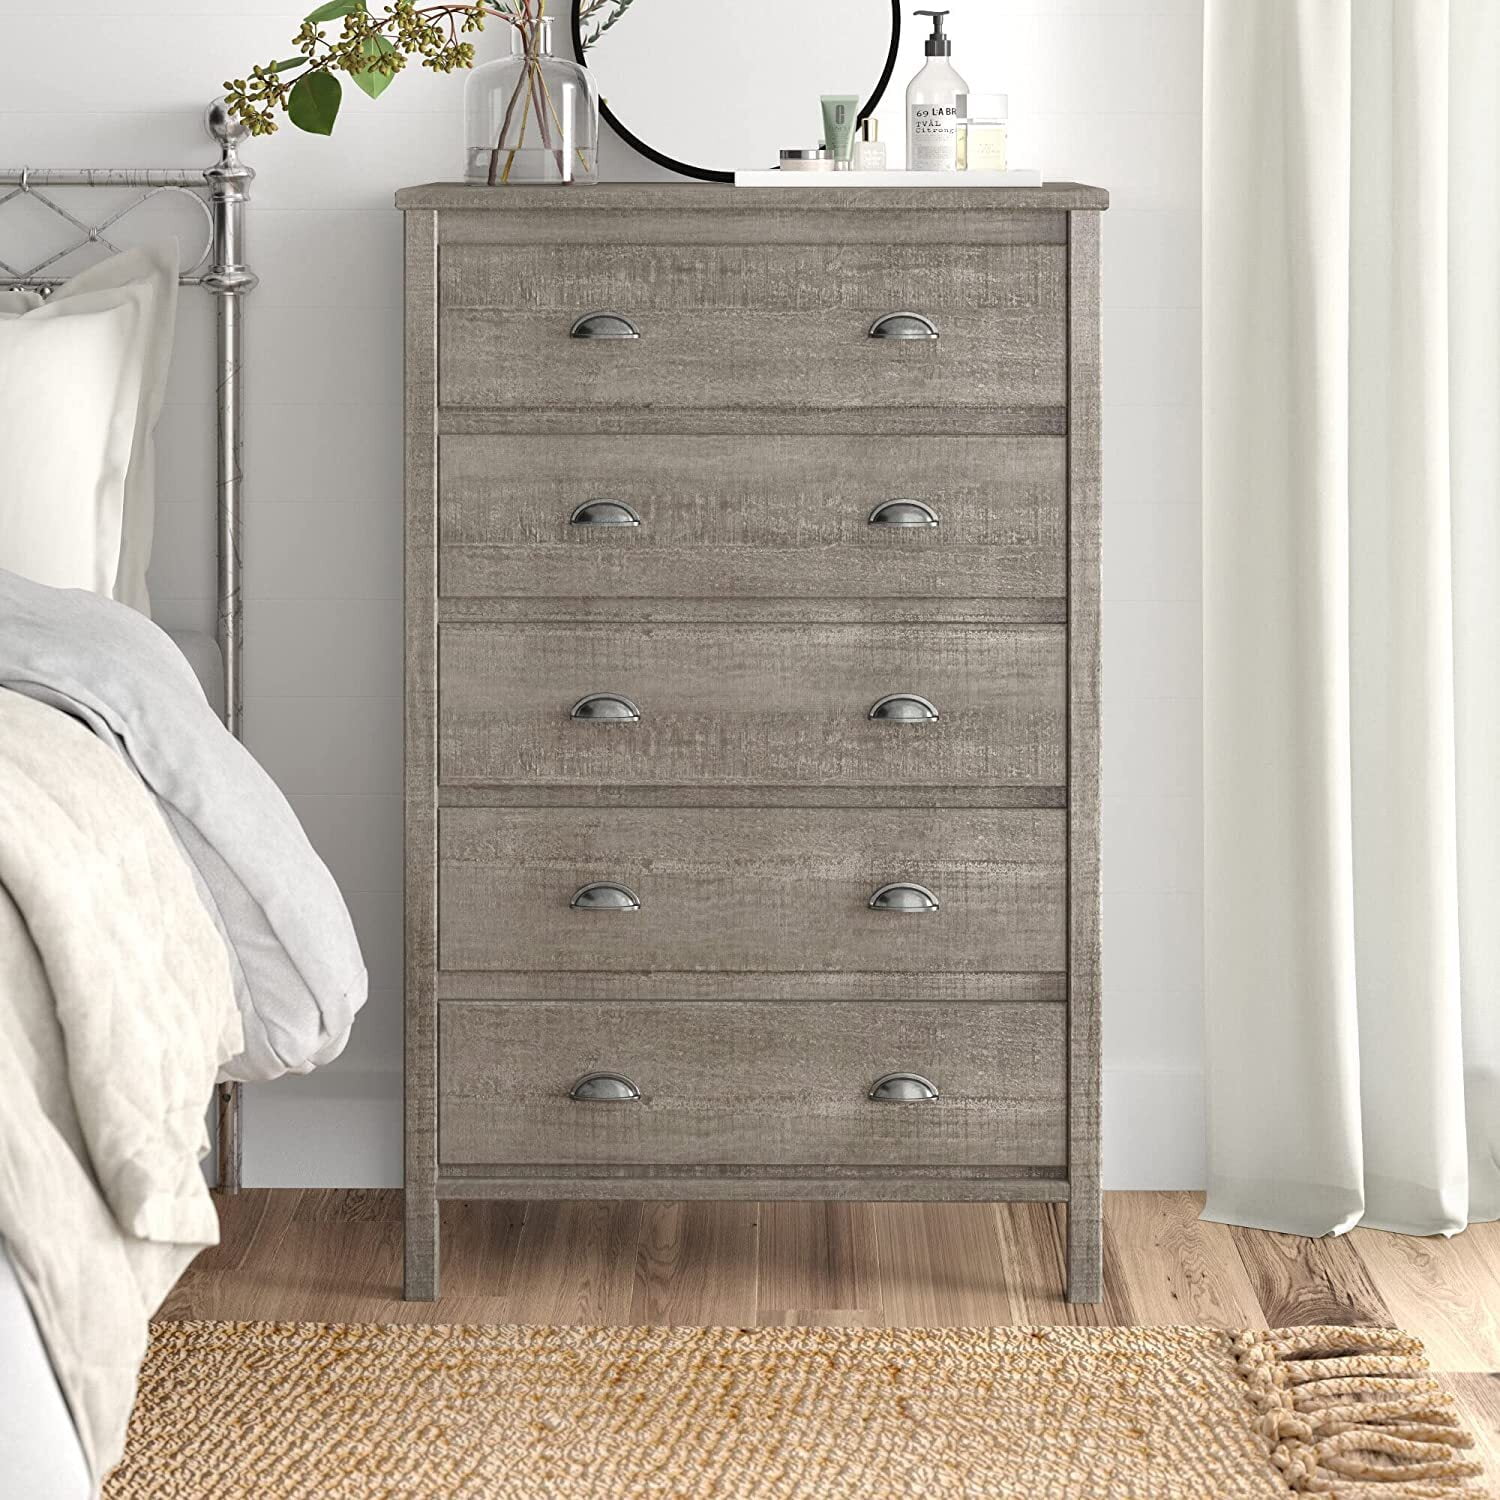 Picture of EcoFlex Furniture BJ307 Baja Five Drawer Chest - Rustic Grey